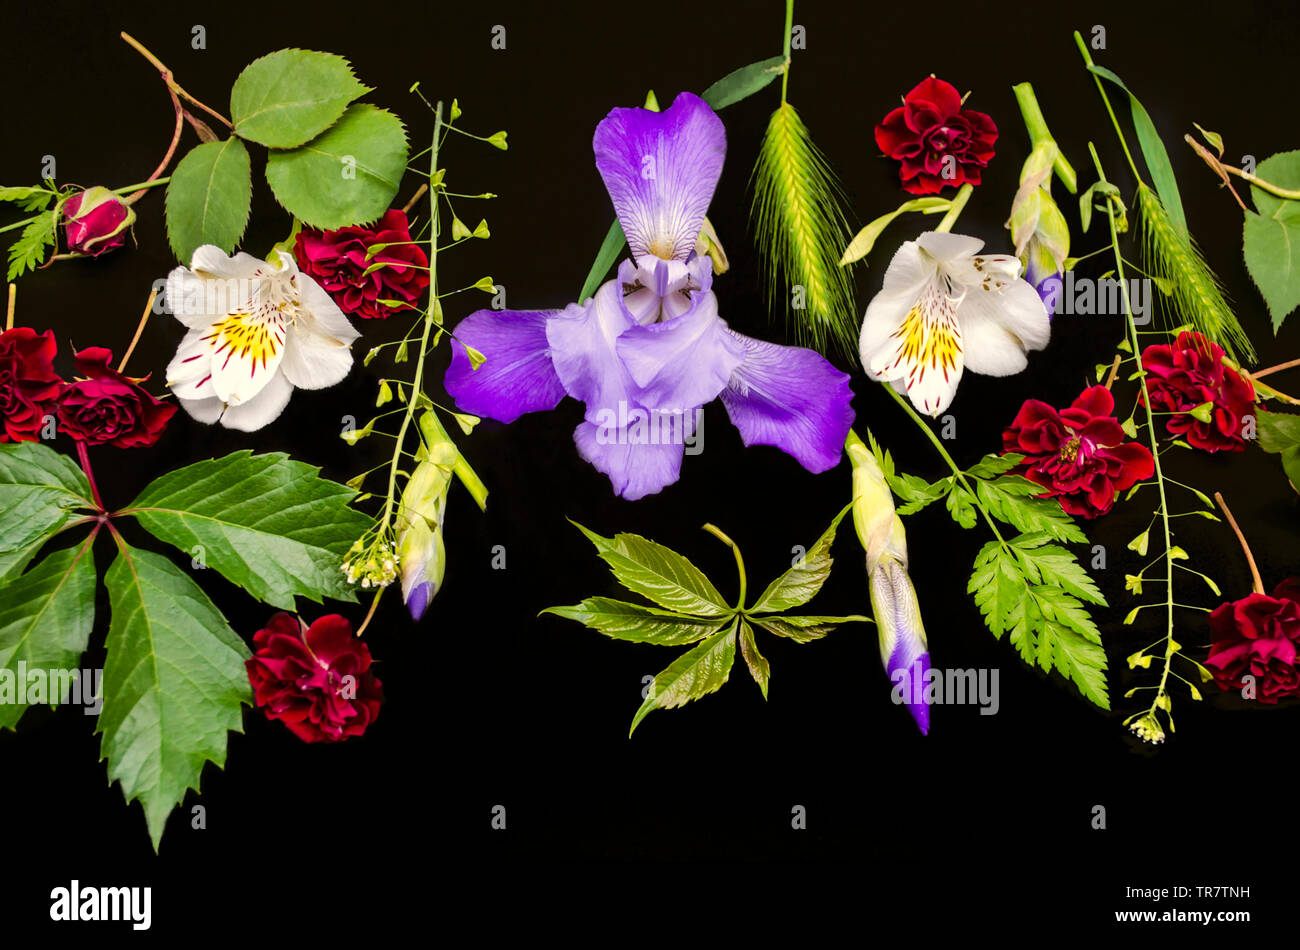 Purple iris with buds, Alstroemeria, small roses, wild grape leaves with various field herbs on black background Stock Photo